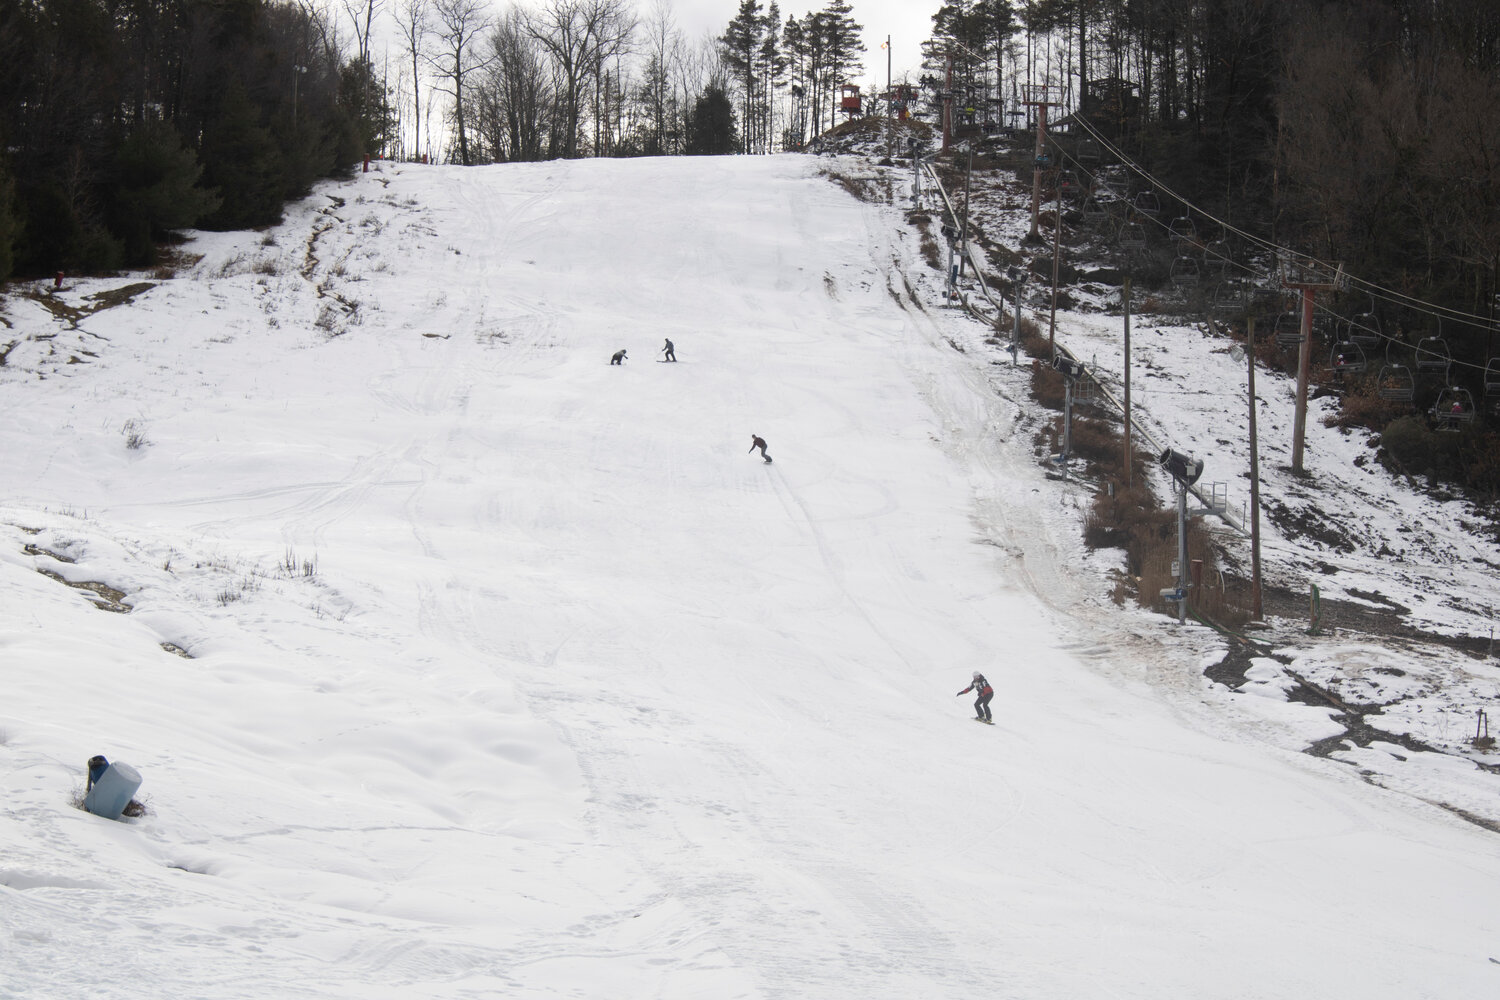 Skiers and snowboarders “shred the gnar” down Holiday’s black diamond trail, Roman Candle.